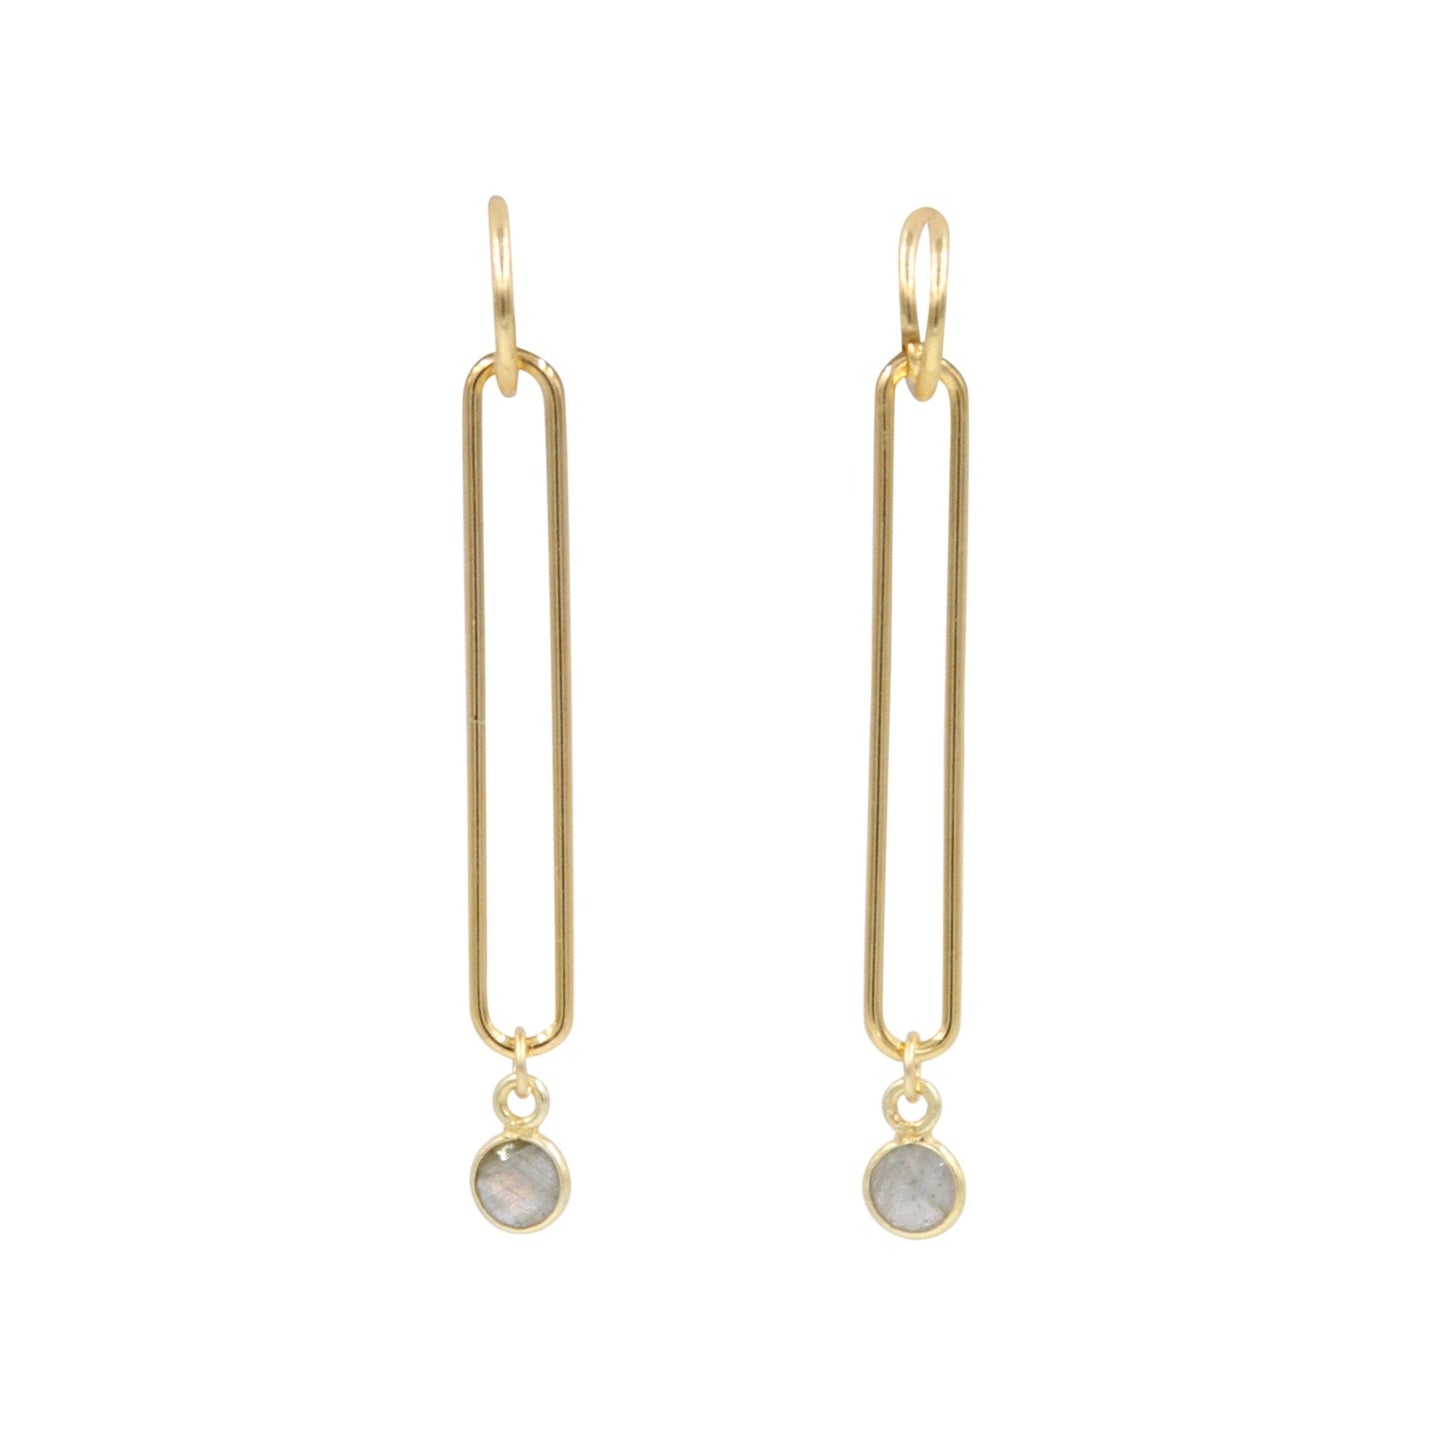 Looper Gold Dangle Earrings with Gemstone Drop - 8 Colors - Sunday Girl by Amy DiLamarraEarrings